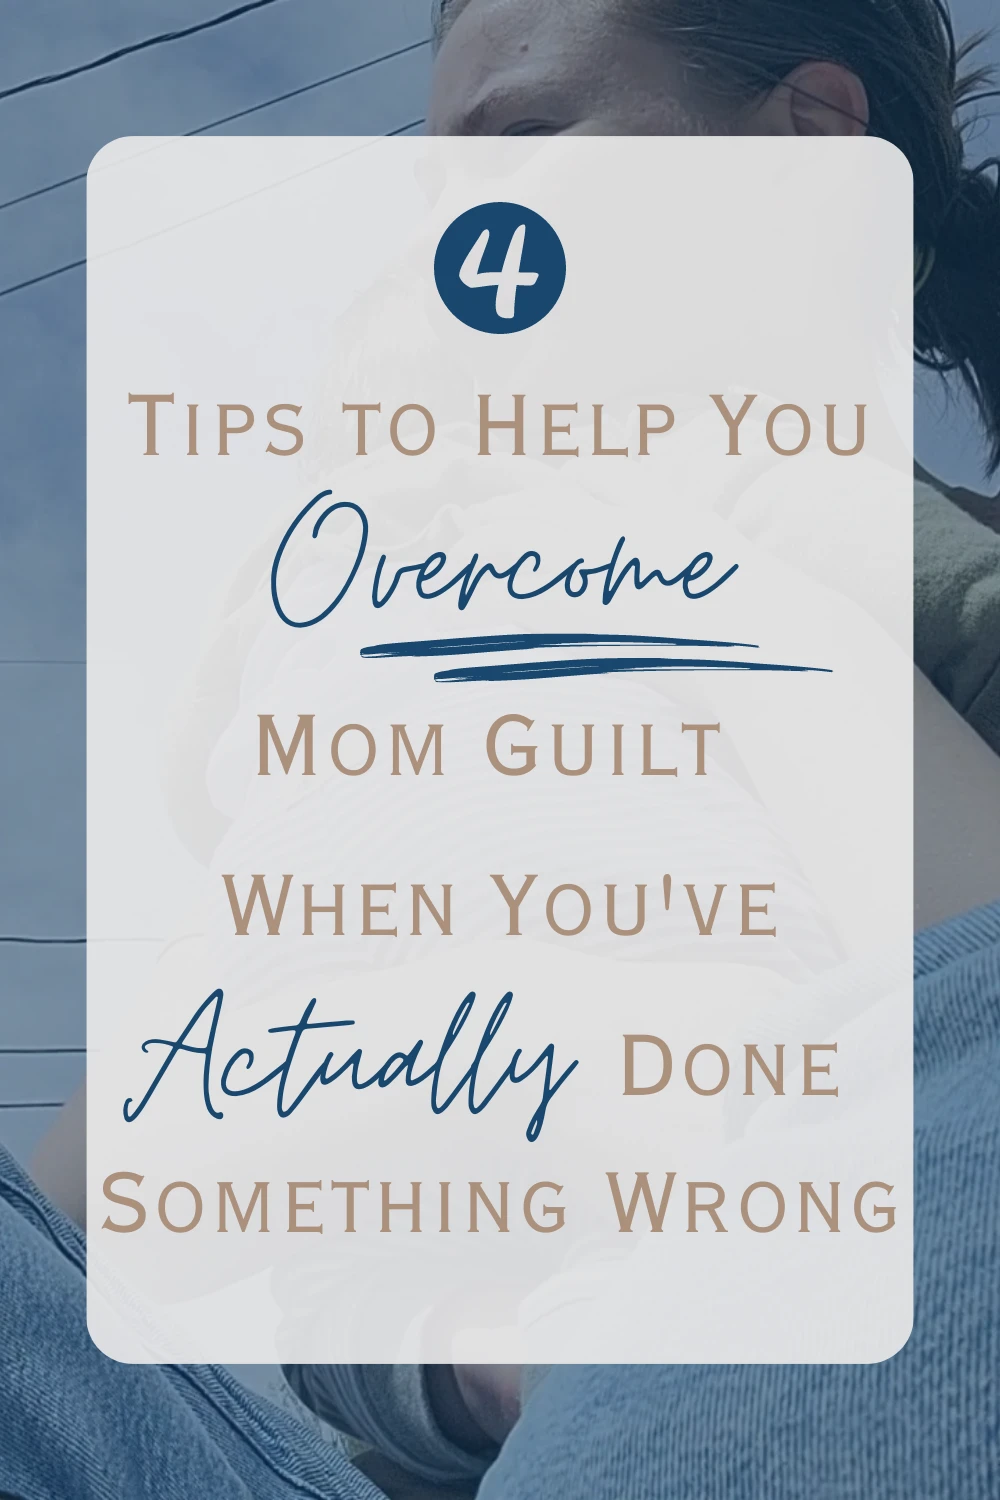 4 tips to help you with mom guilt